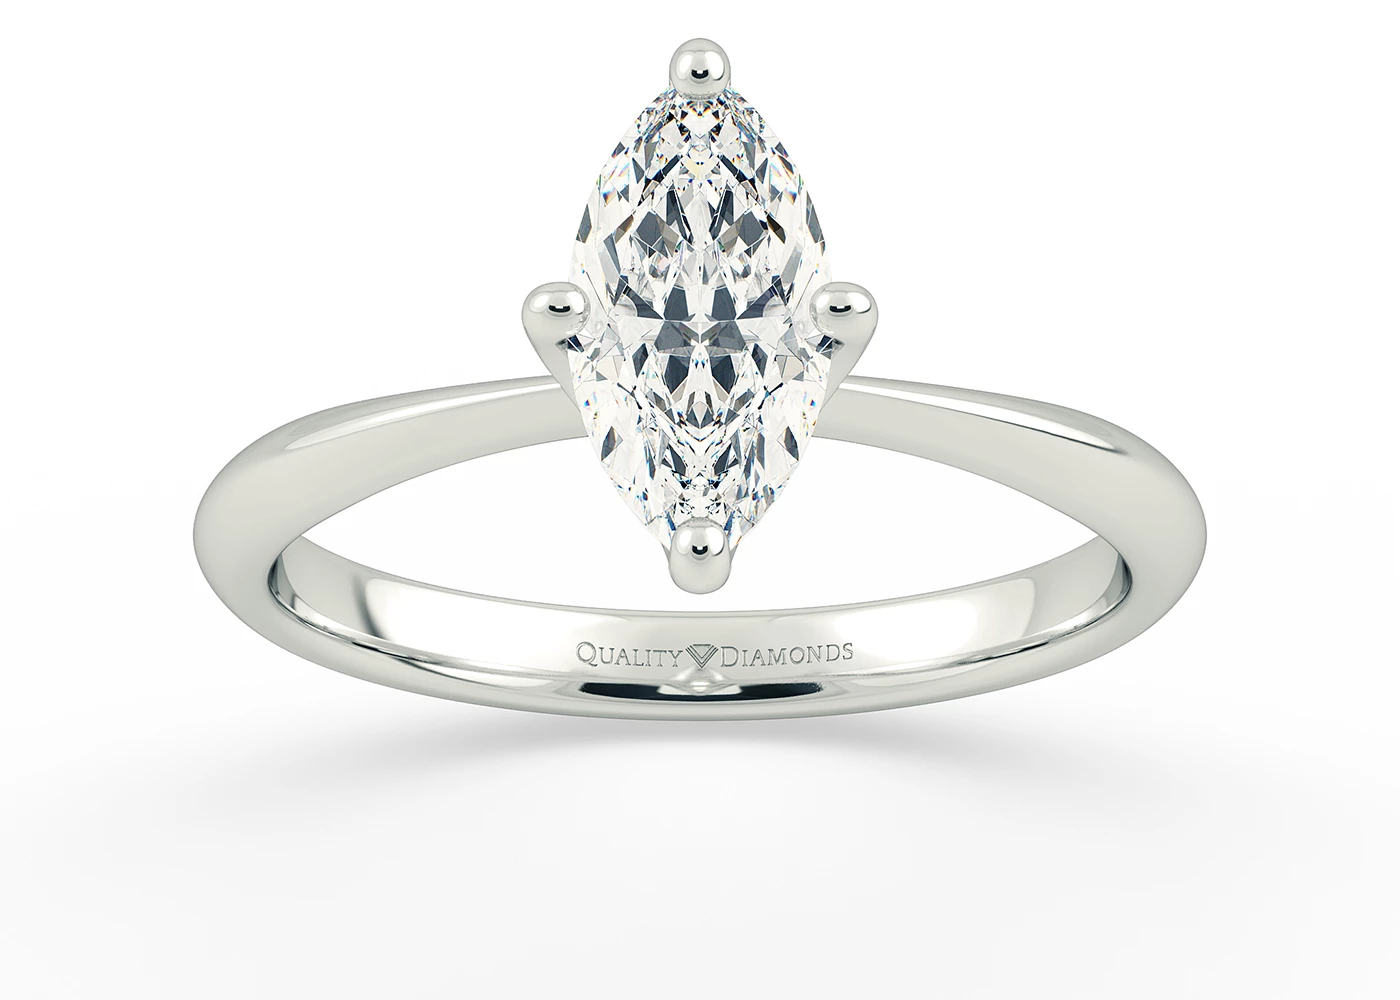 Marquise Amorette Diamond Ring in 9K White Gold